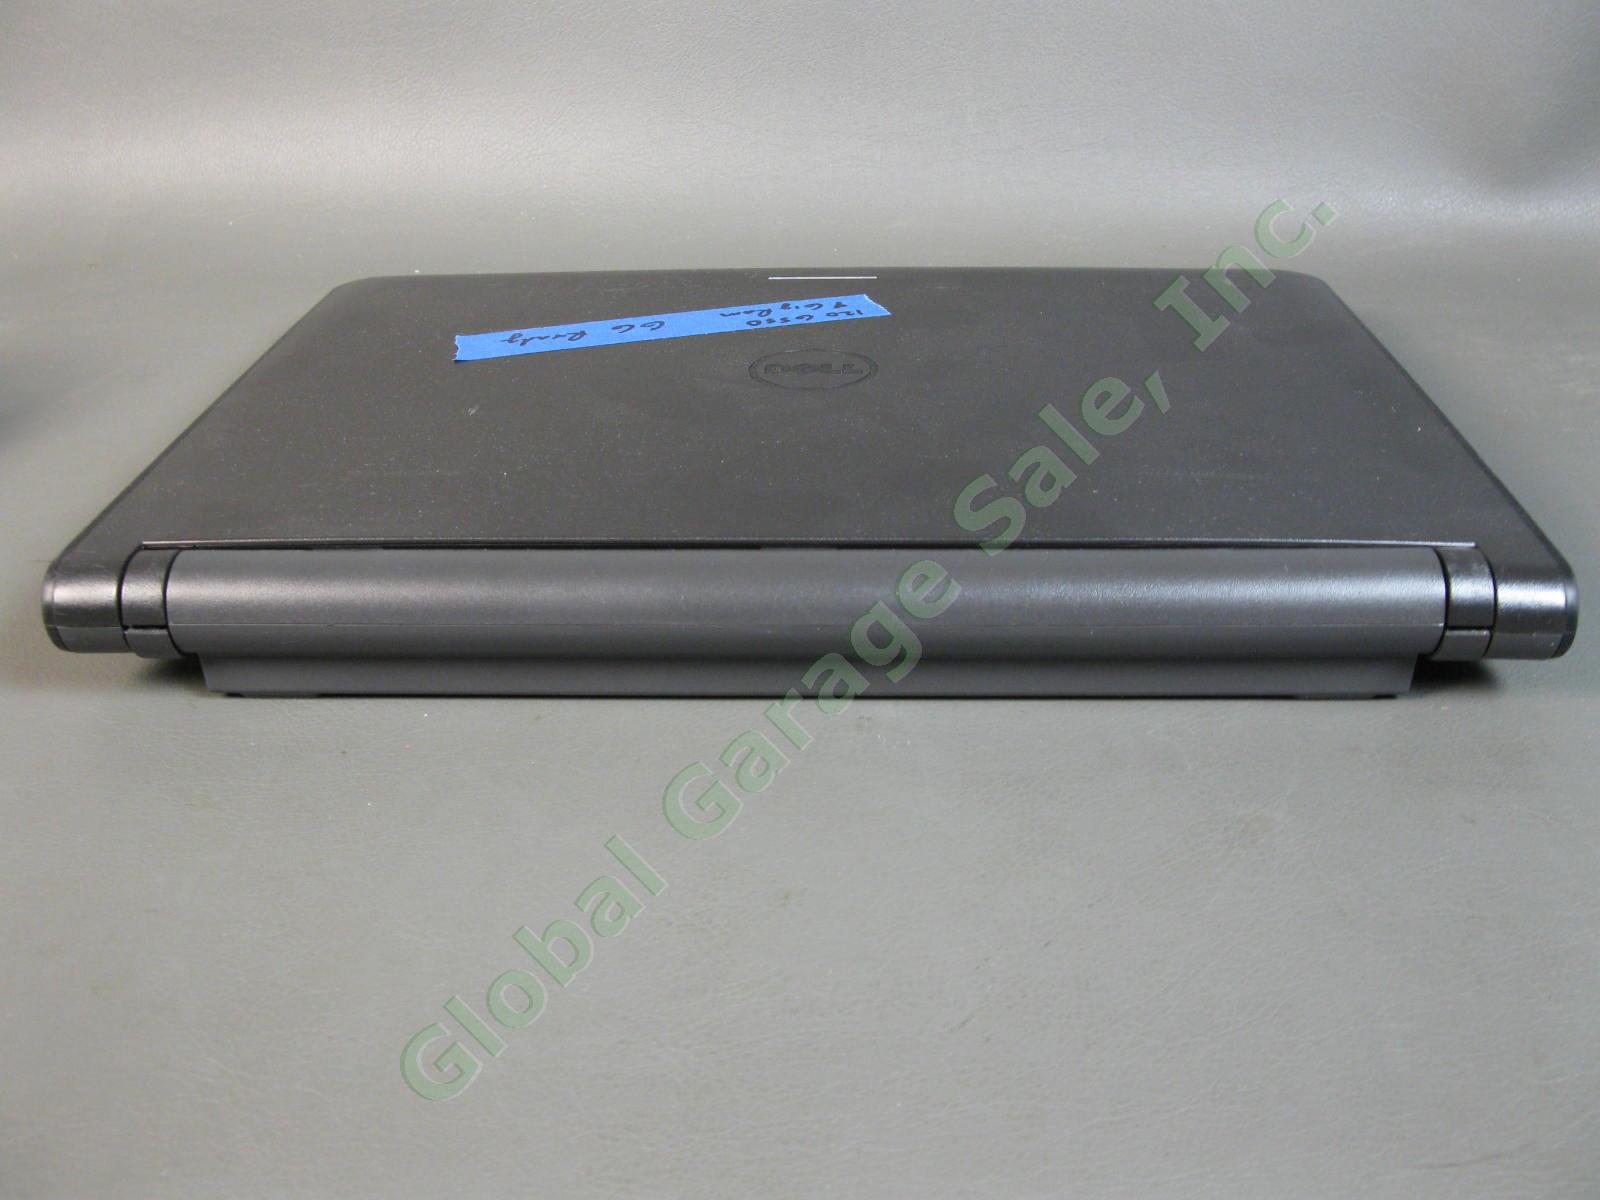 Dell Latitude 3340 Laptop Computer 8GB RAM 120GB SSD 13" Great Condition NO OS 5